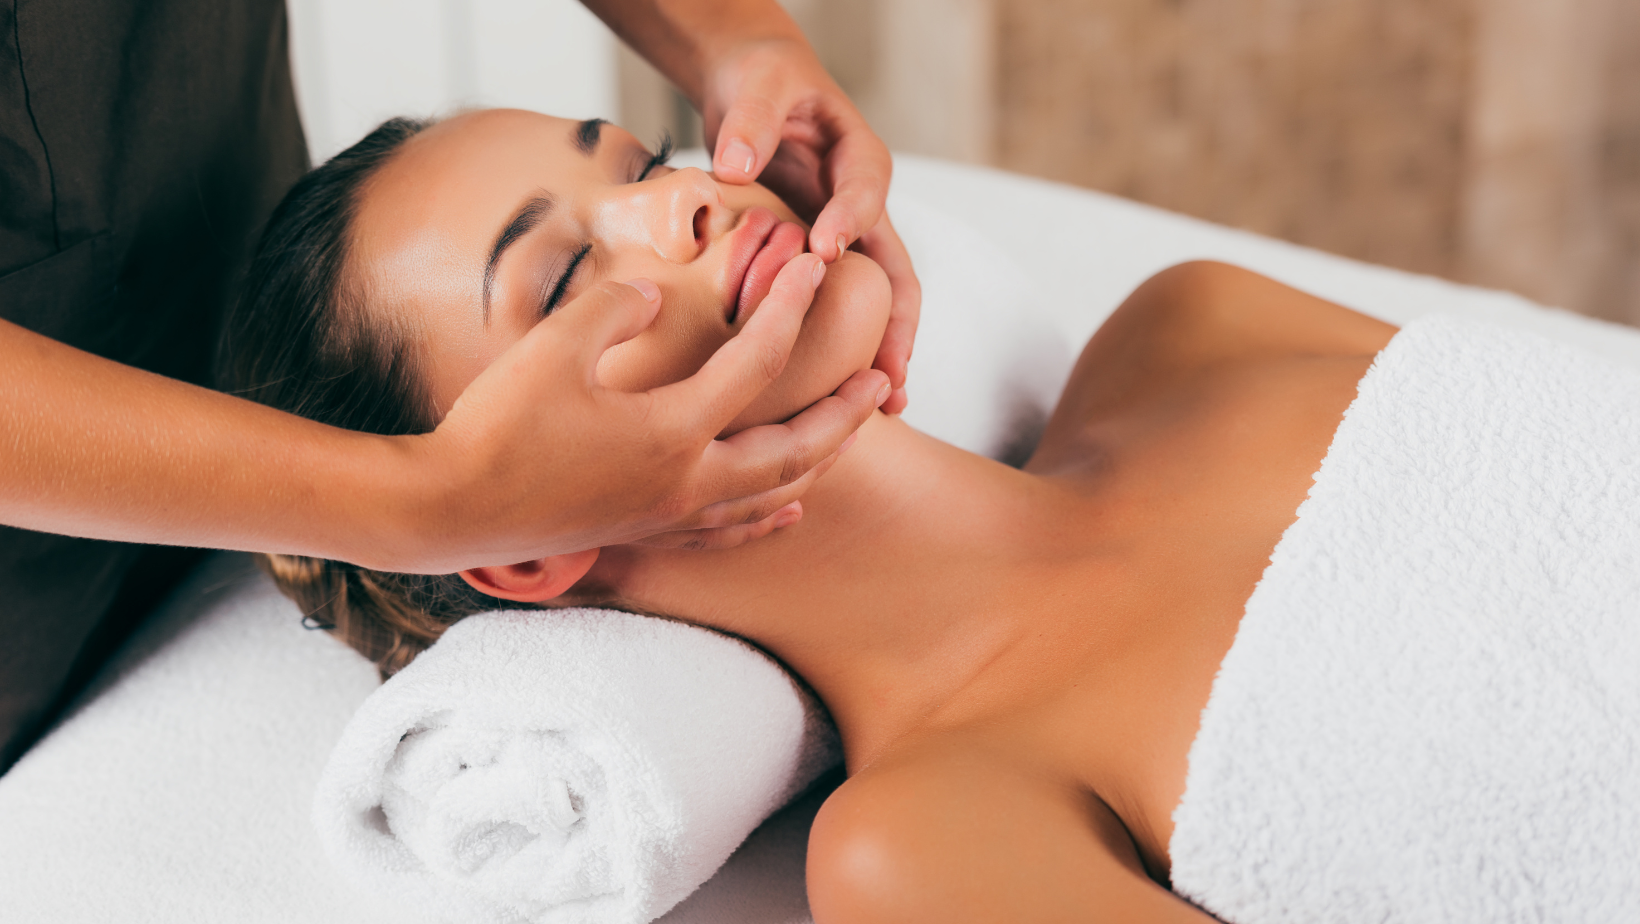 Relaxation and Wellness: Spa Days in New Smyrna Beach